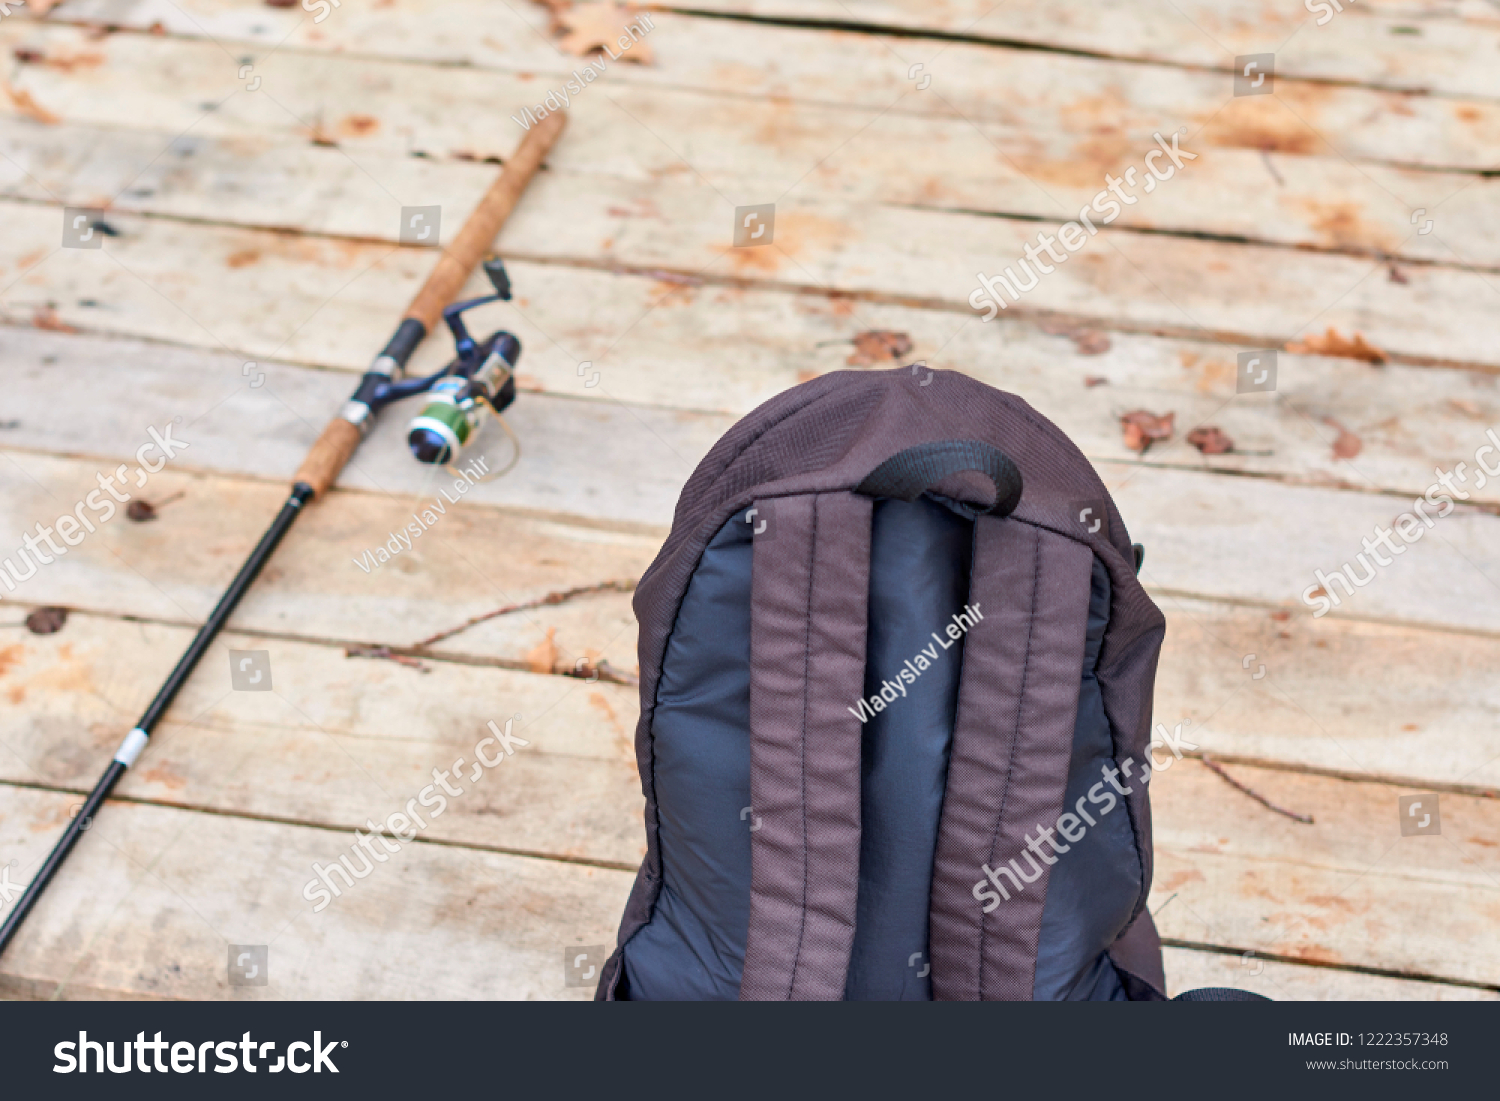 spinning rod and bag on a wooden pier #1222357348